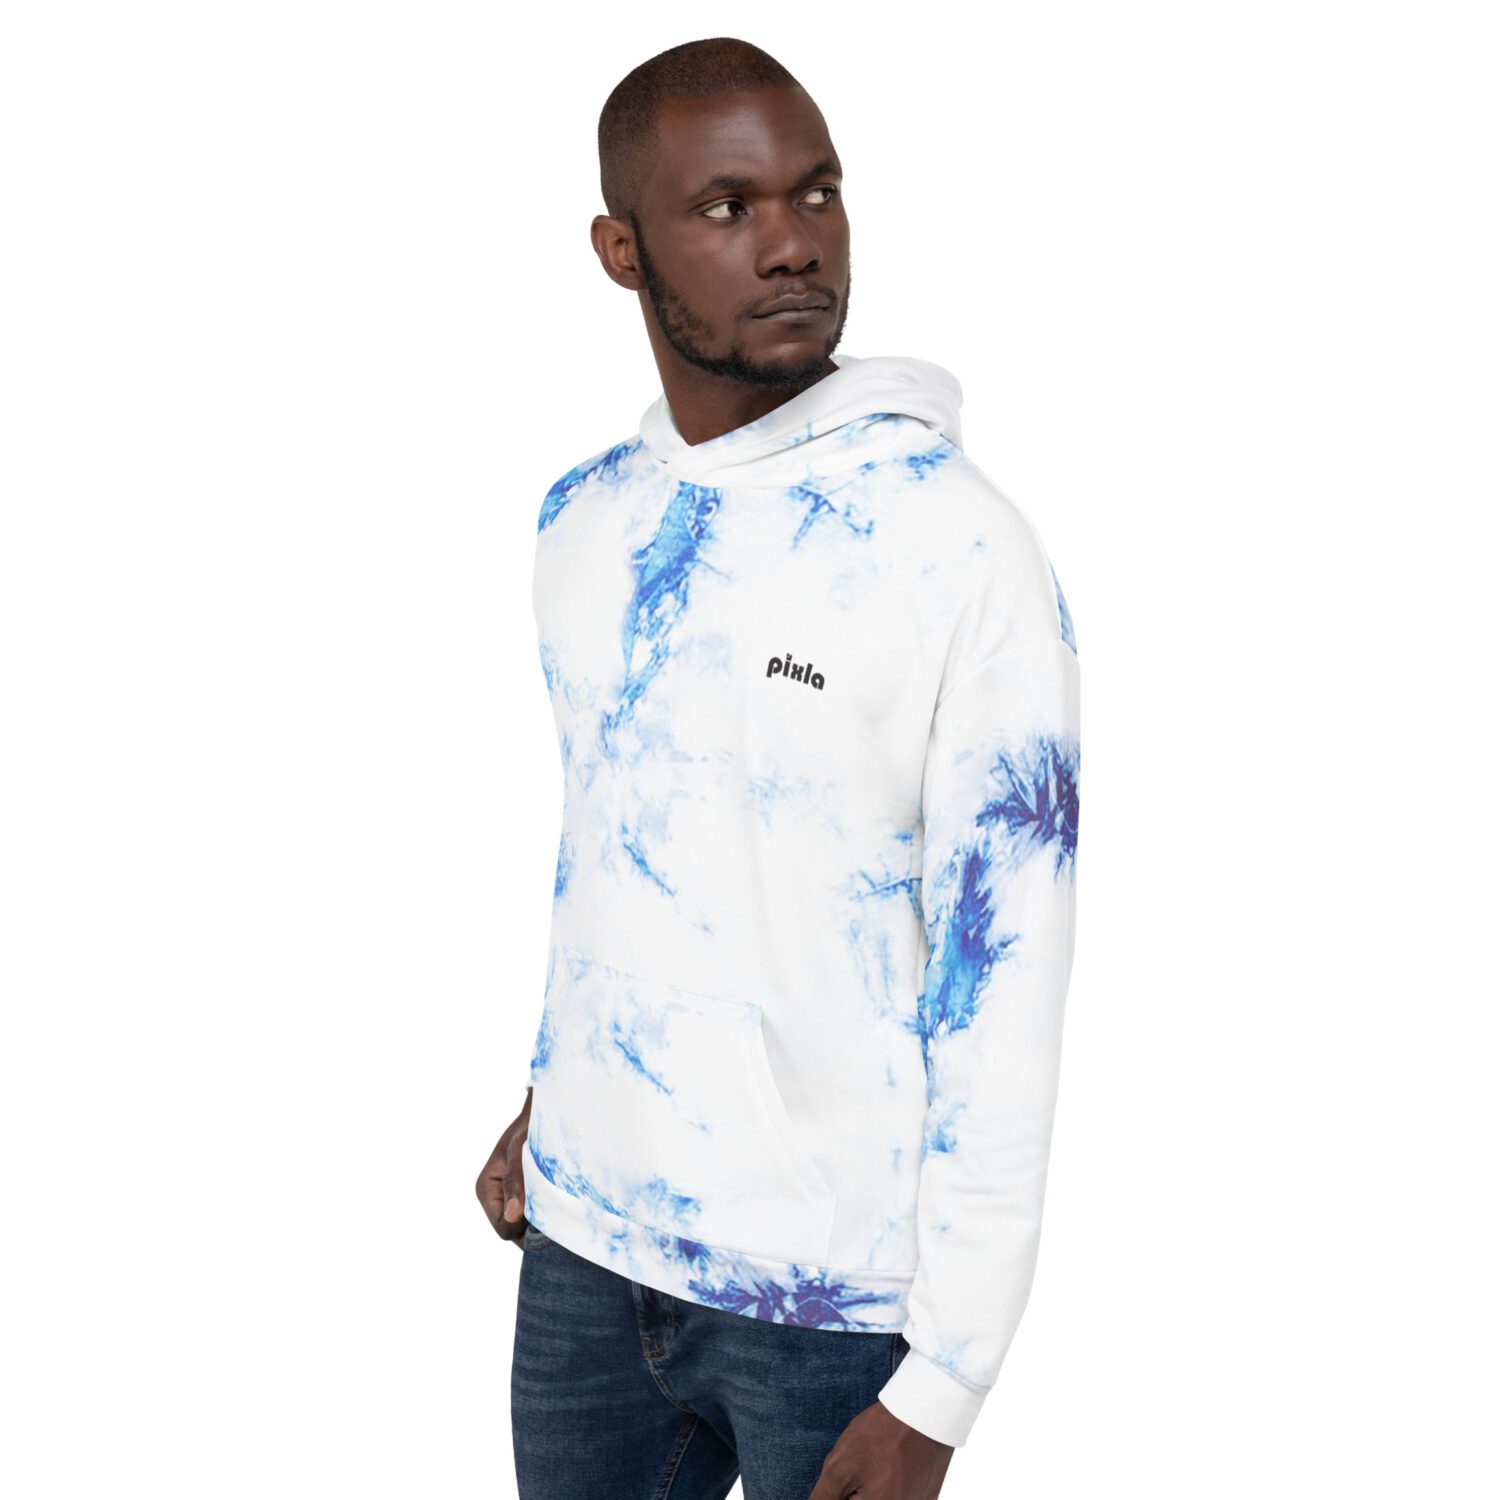 Cobalt blue and white comfy unisex hoodie with a soft outside and a vibrant print, and an even softer brushed fleece inside making it nice and warm. Sublimation print all over.